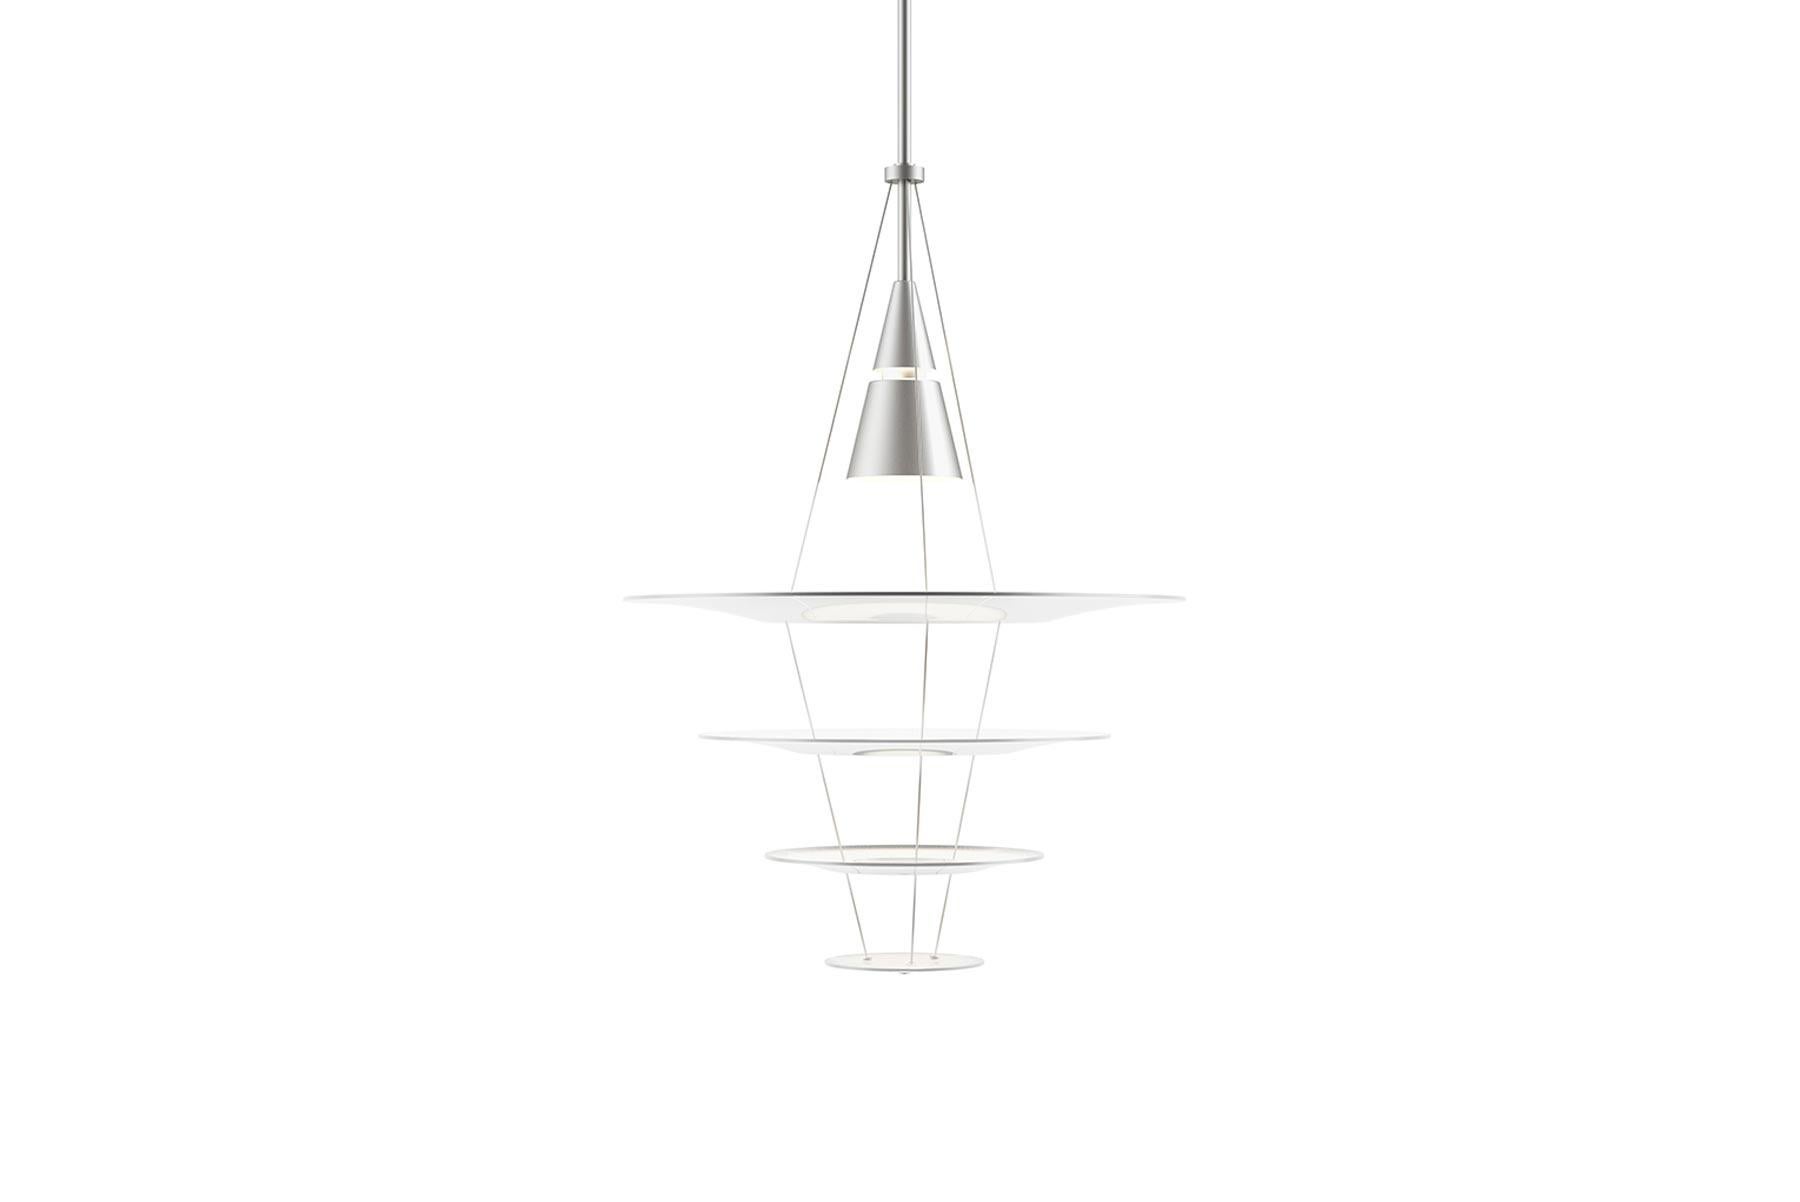 Enigma 425 was designed by Japanese designer Shoichi Uchiyama in 2003. Uchiyama presented a design idea to Louis Poulsen which deconstructed the traditional chandelier concept into slim layers of concentric circles. This involved floating shades